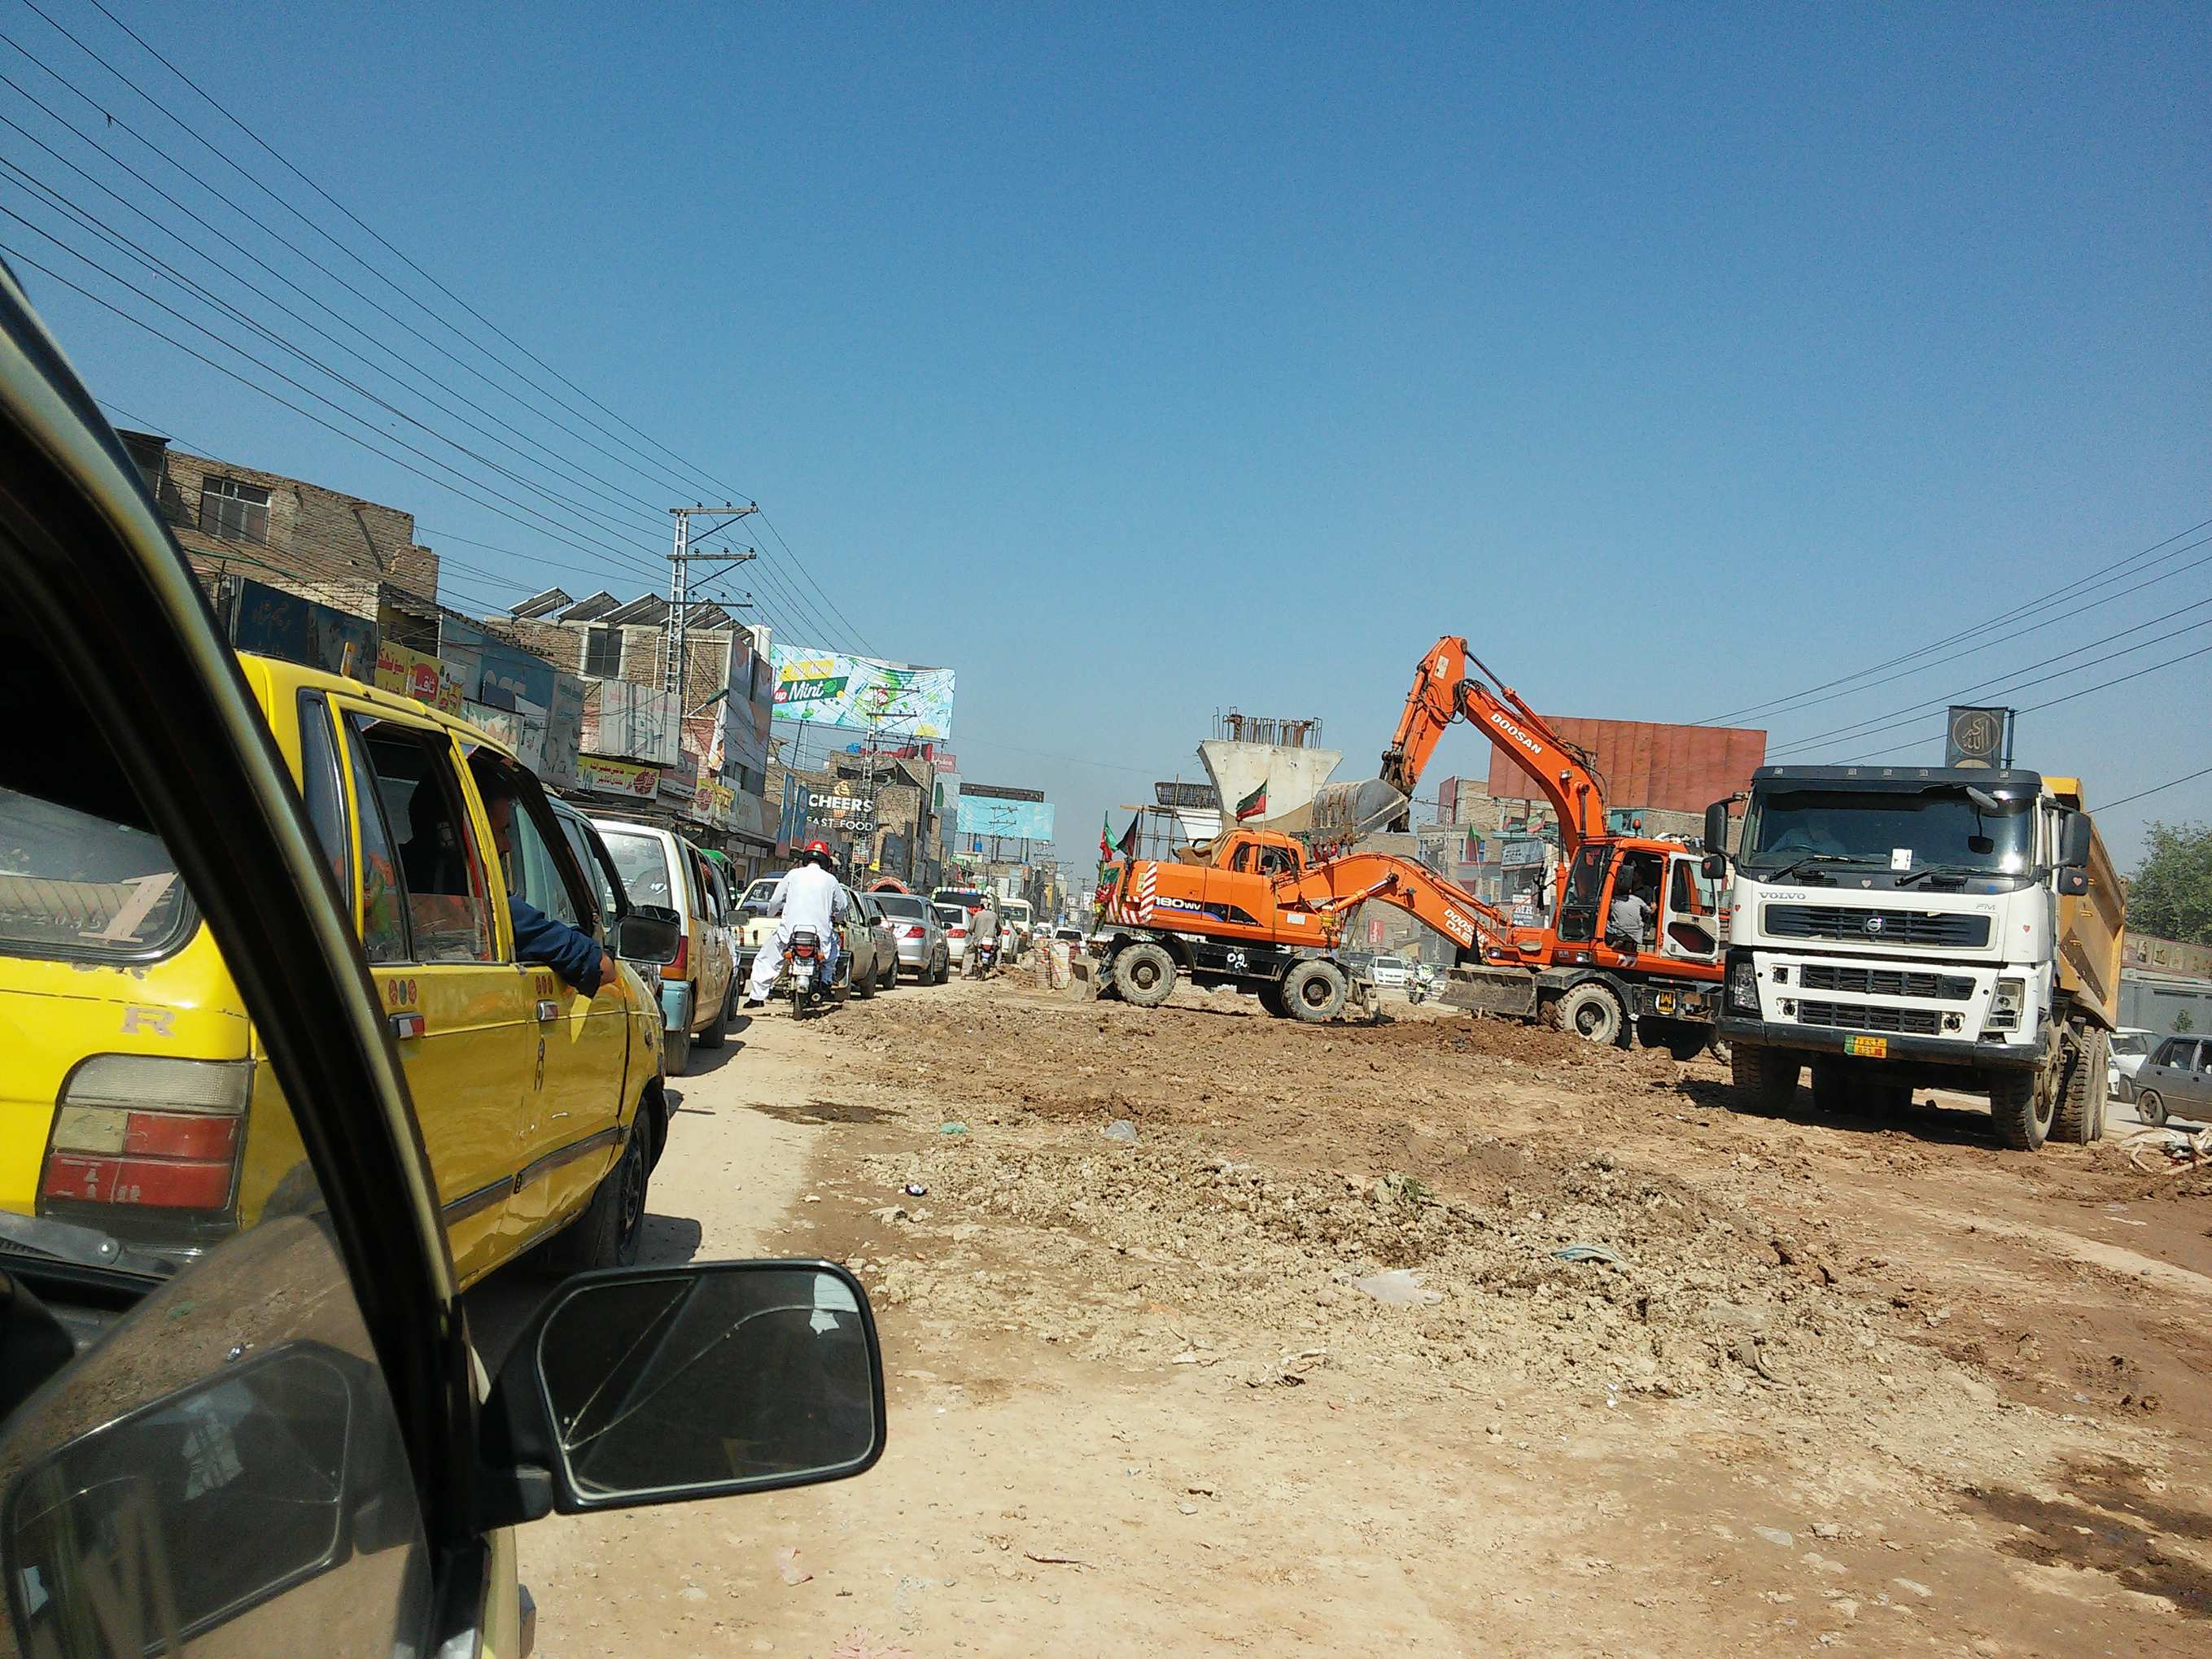 Cars in stand still traffic with nothing to seperate them from the construction site of BRT less than a meter away 